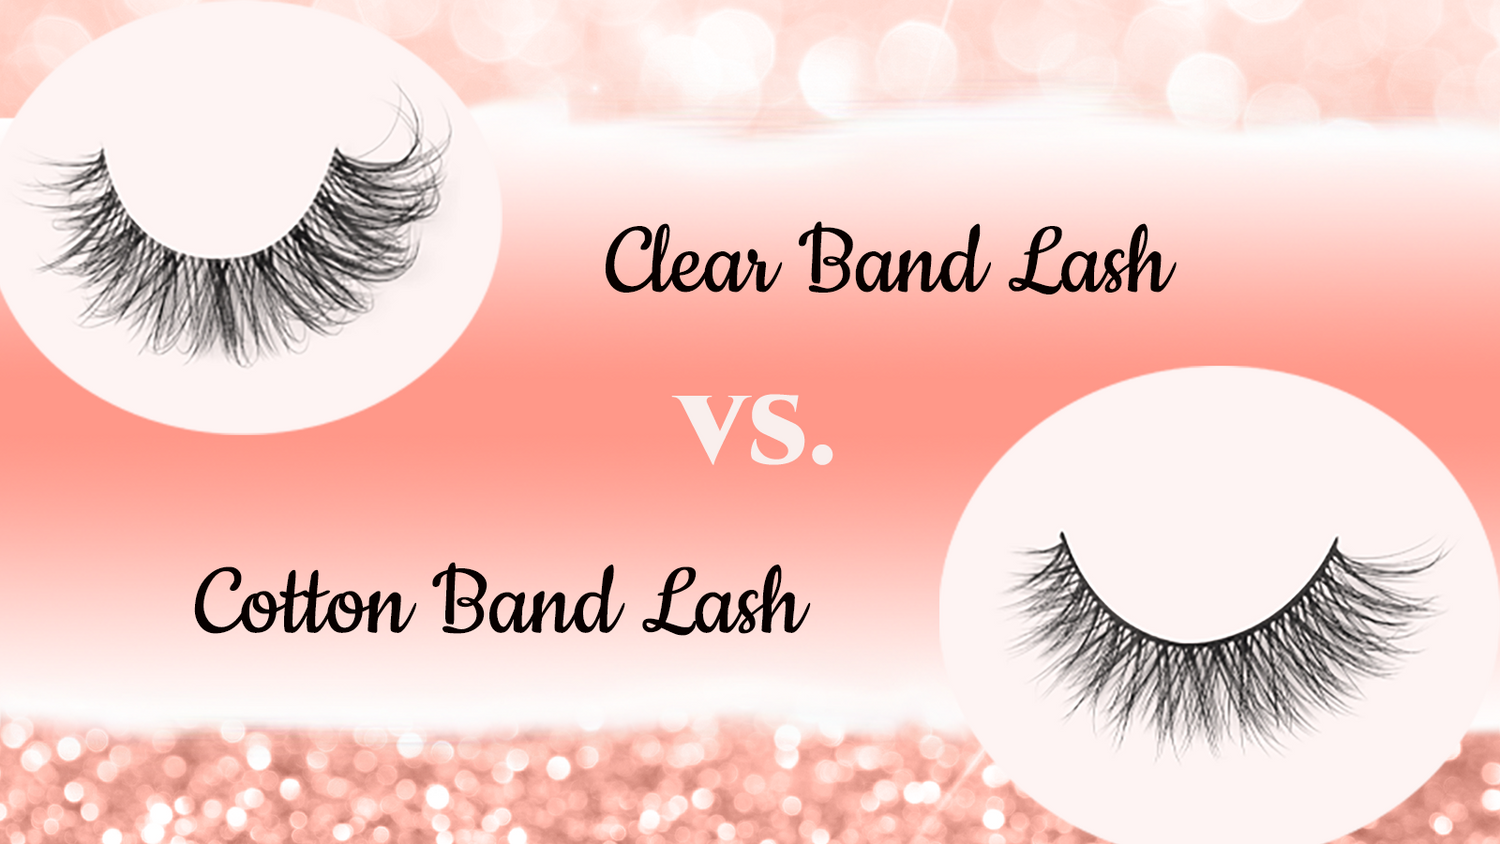 Clear Band Lash vs. Cotton Band Lash: Which is Better?